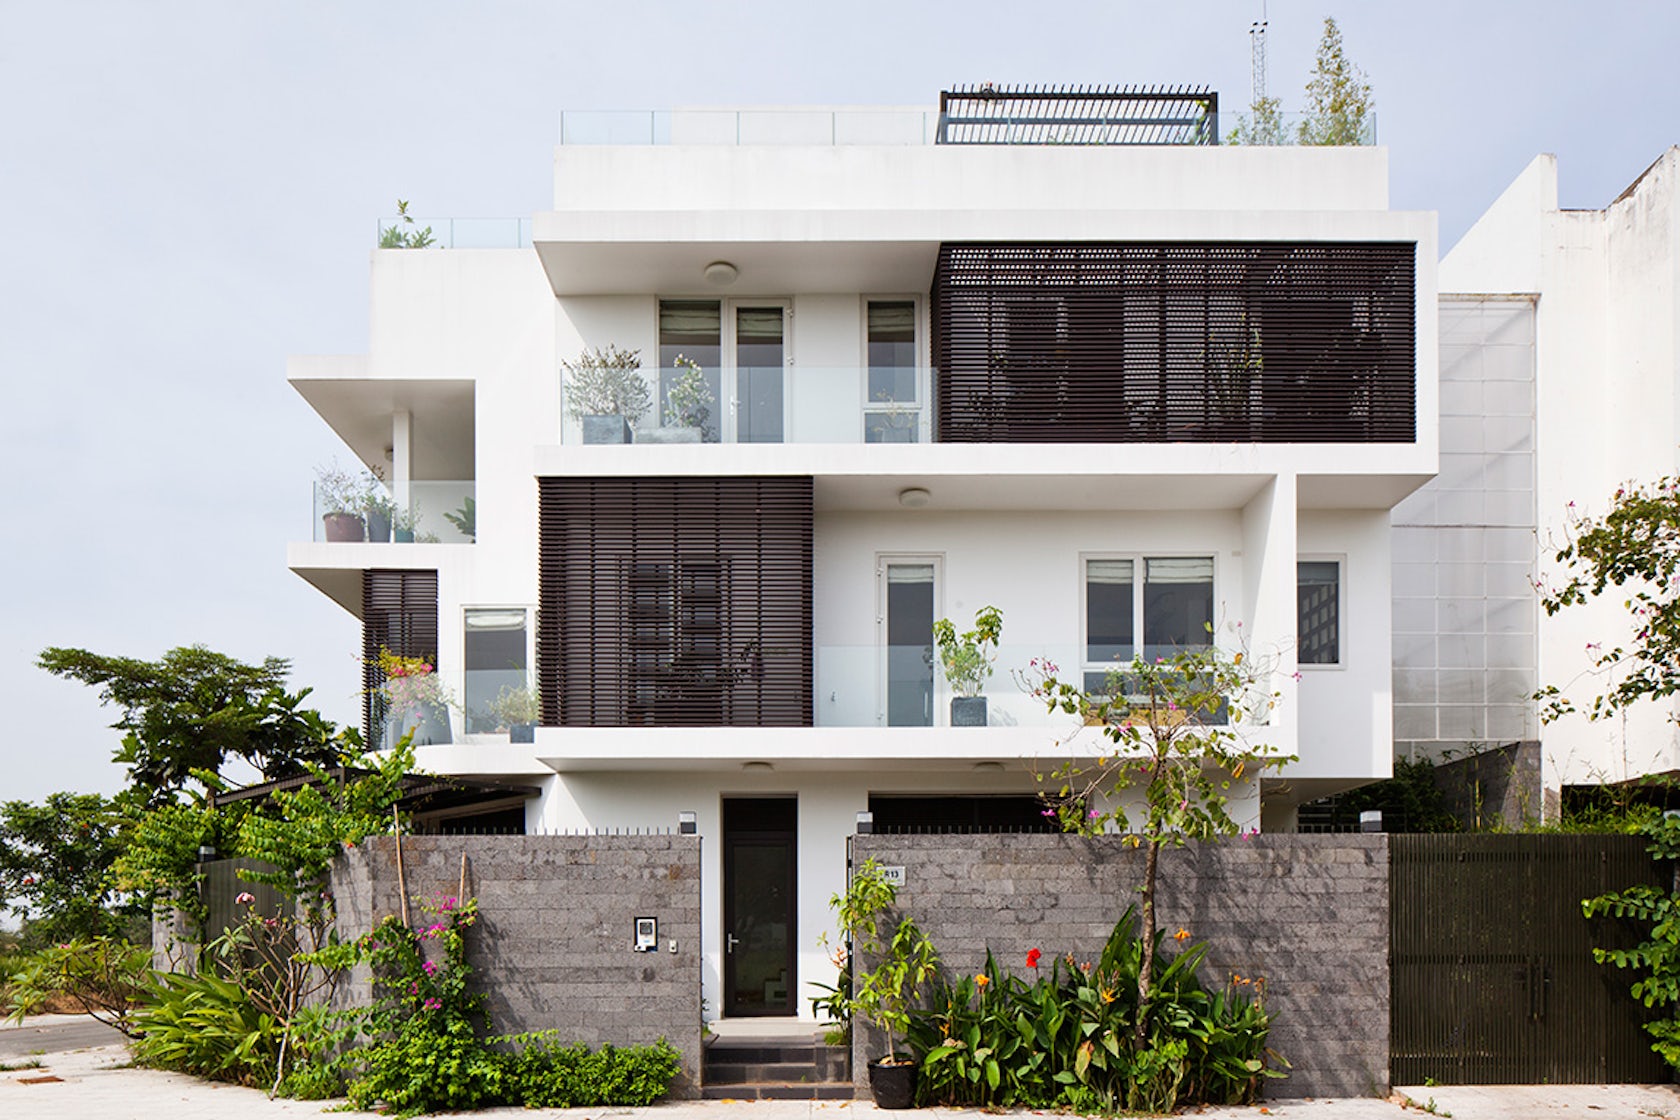 D2 Town House by MM++ Architects / MIMYA